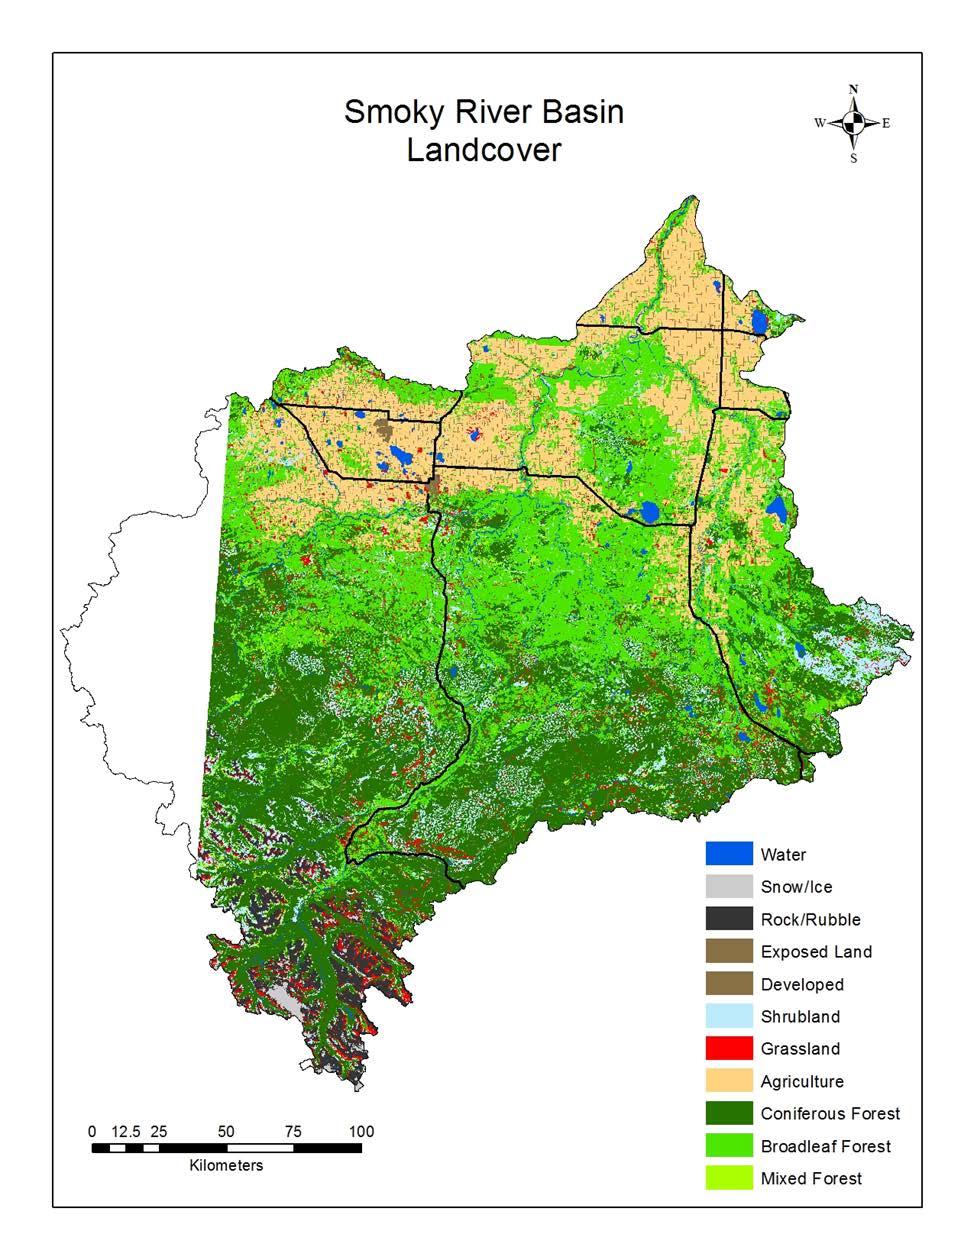 Land Cover and